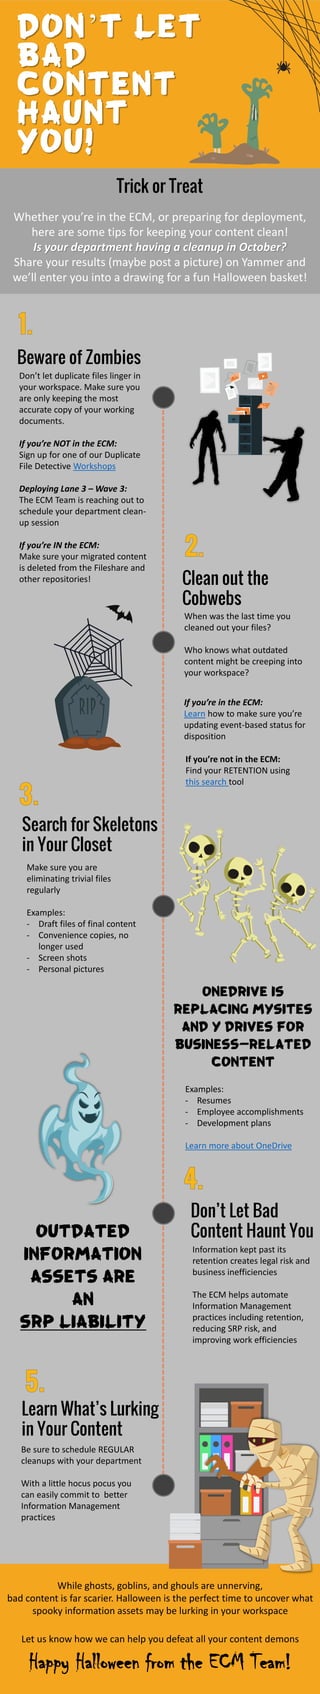 Trick or Treat
Whether you’re in the ECM, or preparing for deployment,
here are some tips for keeping your content clean!
Is your department having a cleanup in October?
Share your results (maybe post a picture) on Yammer and
we’ll enter you into a drawing for a fun Halloween basket!
While ghosts, goblins, and ghouls are unnerving,
bad content is far scarier. Halloween is the perfect time to uncover what
spooky information assets may be lurking in your workspace
Let us know how we can help you defeat all your content demons
Happy Halloween from the ECM Team!
Beware of Zombies
Clean out the
Cobwebs
Search for Skeletons
in Your Closet
Don’t Let Bad
Content Haunt You
Learn What’s Lurking
in Your Content
Information kept past its
retention creates legal risk and
business inefficiencies
The ECM helps automate
Information Management
practices including retention,
reducing SRP risk, and
improving work efficiencies
Make sure you are
eliminating trivial files
regularly
Examples:
- Draft files of final content
- Convenience copies, no
longer used
- Screen shots
- Personal pictures
When was the last time you
cleaned out your files?
Who knows what outdated
content might be creeping into
your workspace?
Don’t let duplicate files linger in
your workspace. Make sure you
are only keeping the most
accurate copy of your working
documents.
If you’re NOT in the ECM:
Sign up for one of our Duplicate
File Detective Workshops
Deploying Lane 3 – Wave 3:
The ECM Team is reaching out to
schedule your department clean-
up session
If you’re IN the ECM:
Make sure your migrated content
is deleted from the Fileshare and
other repositories!
Be sure to schedule REGULAR
cleanups with your department
With a little hocus pocus you
can easily commit to better
Information Management
practices
ONEDRIVE is
replacing MySites
and Y Drives for
business-related
content
Examples:
- Resumes
- Employee accomplishments
- Development plans
Learn more about OneDrive
Outdated
information
assets are
an
SRP LIABILITY
If you’re not in the ECM:
Find your RETENTION using
this search tool
If you’re in the ECM:
Learn how to make sure you’re
updating event-based status for
disposition
Don’t let
bad
content
haunt
you!
 